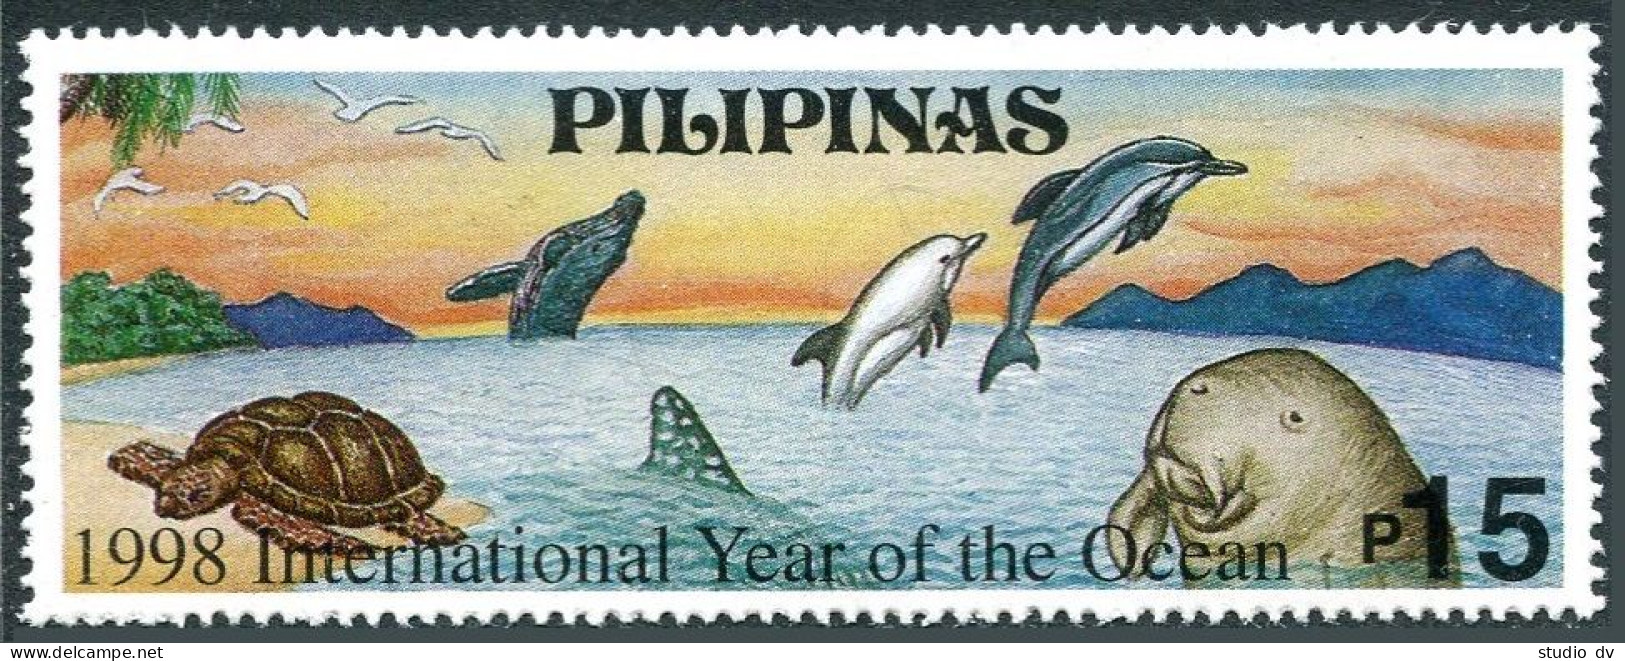 Philippines 2554, MNH. Year Of The Ocean-1998. Seals, Turtle. - Philippines